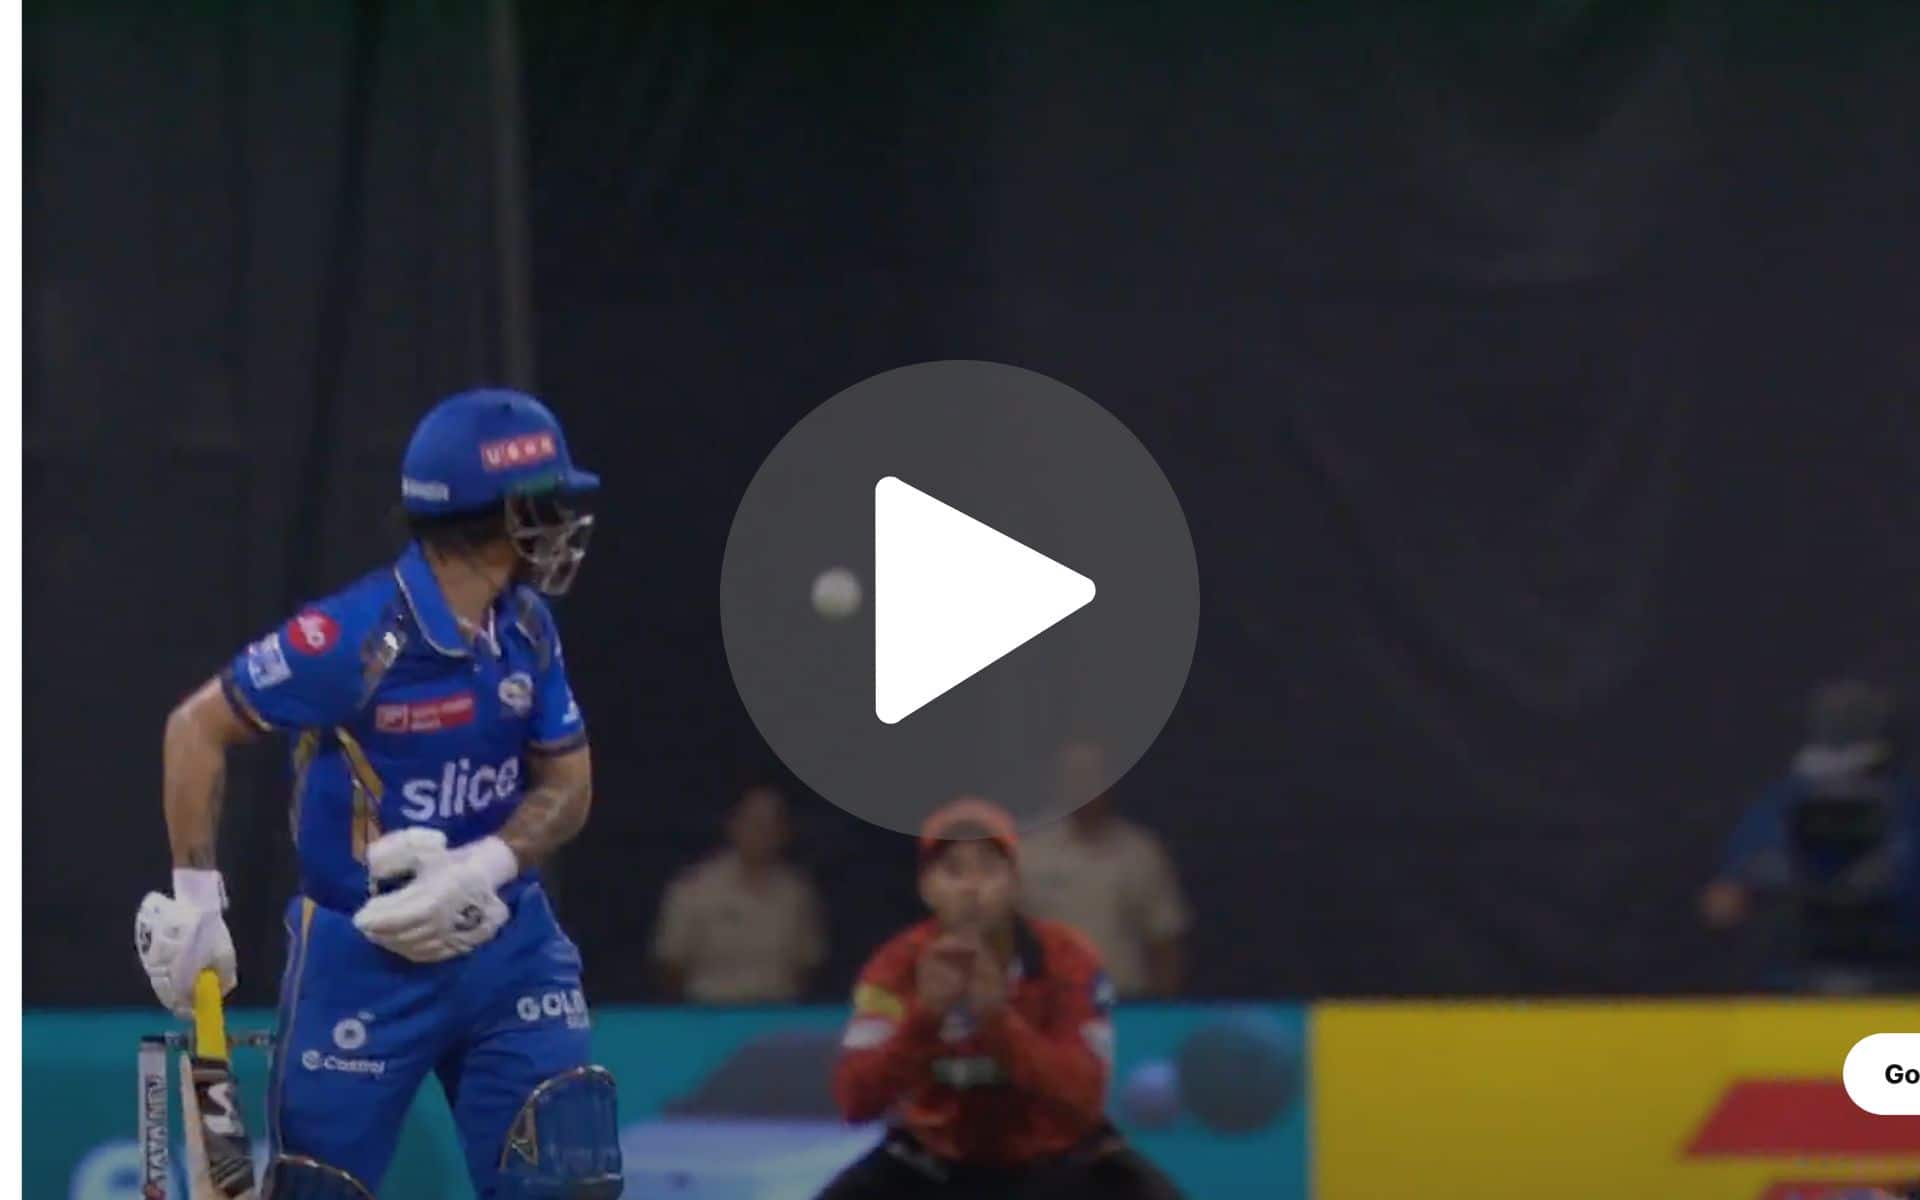 [Watch] Jansen's Unplayable Peach 'Too Hot To Handle' For Ishan As Mayank Does The Rest